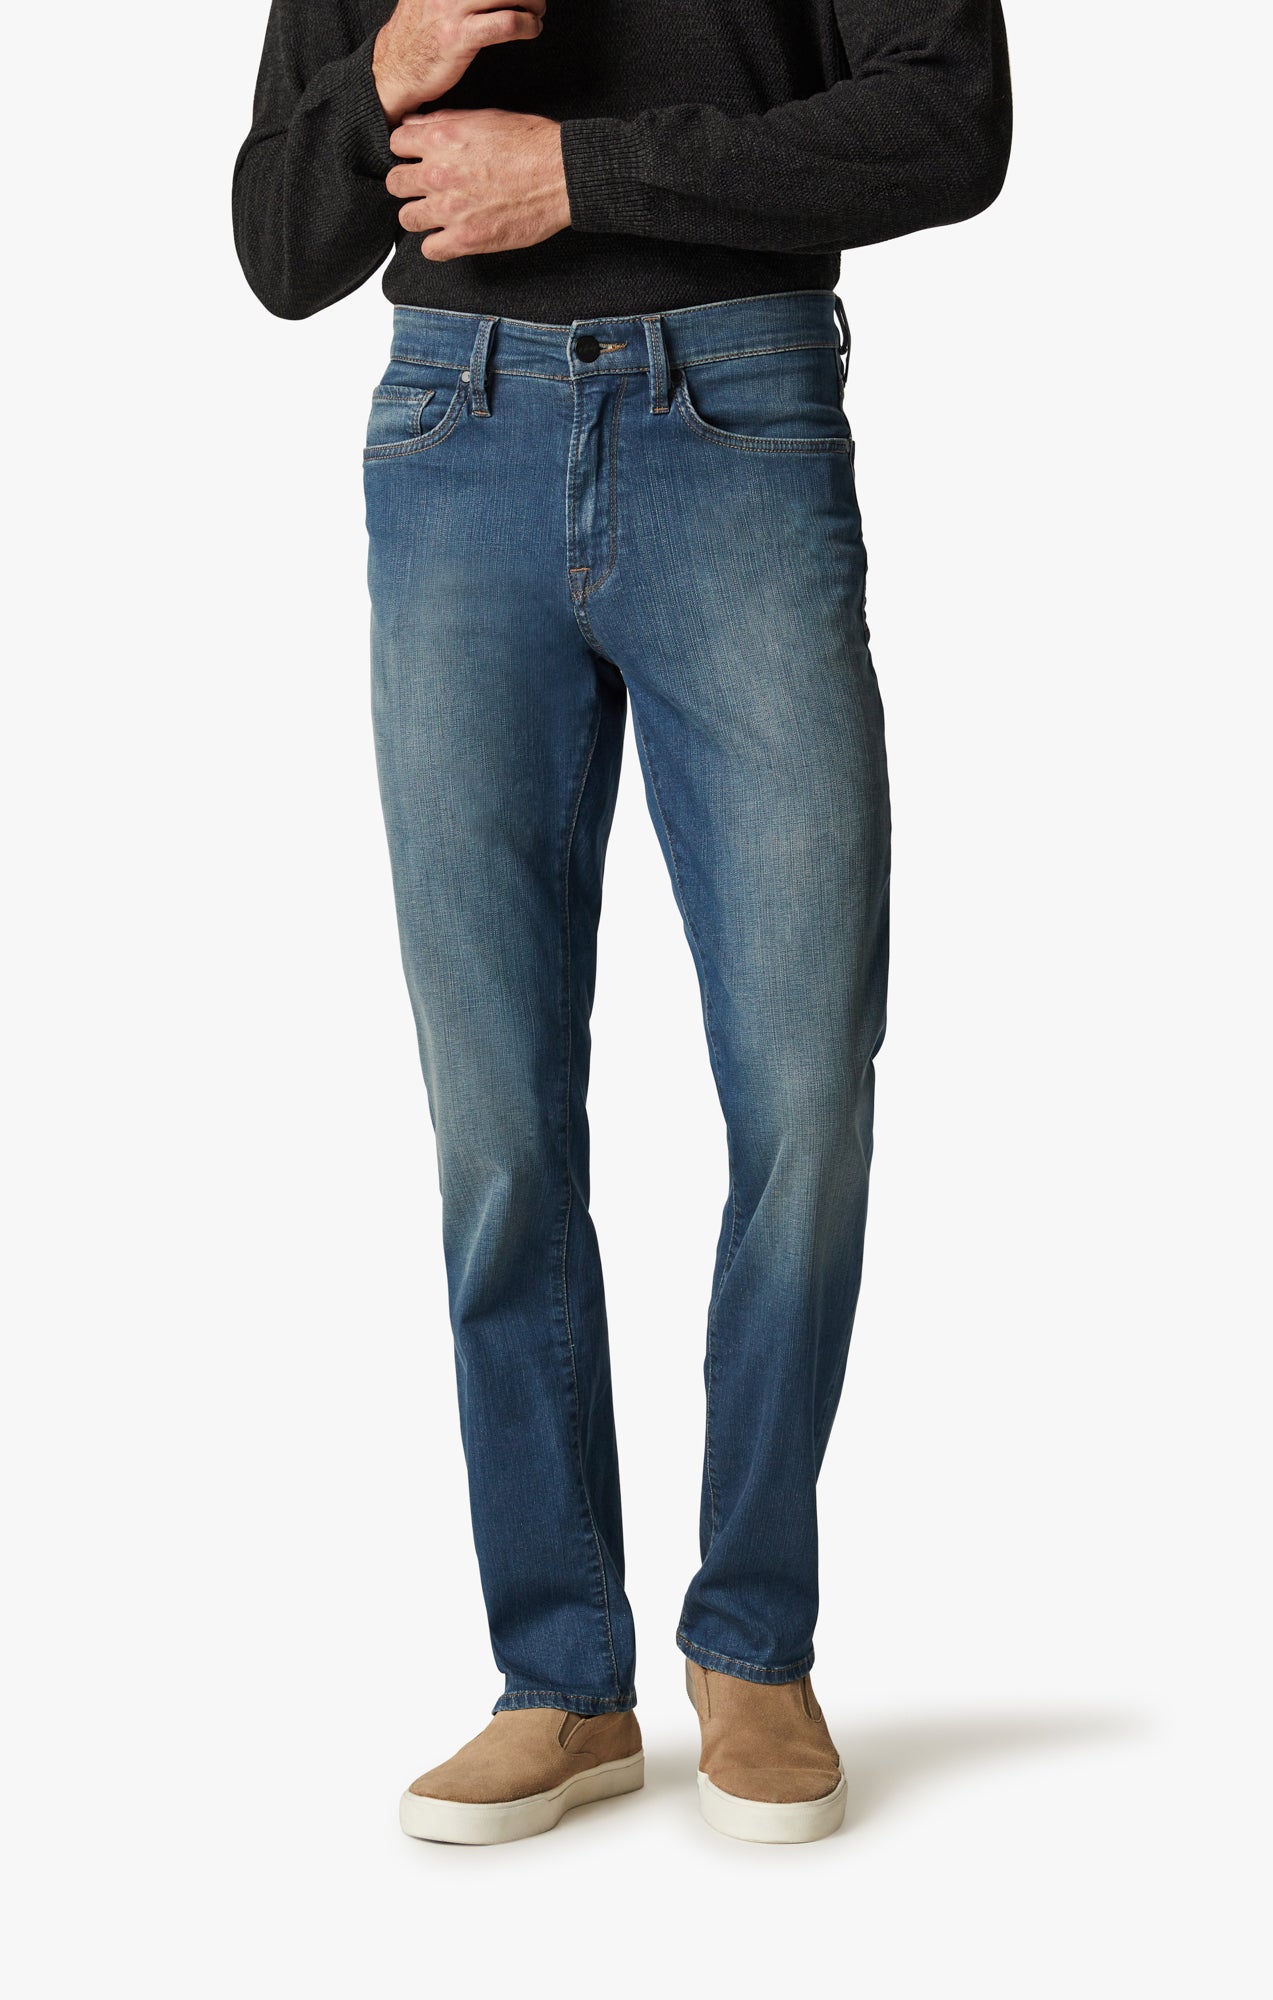 34 Heritage Men's Charisma High Rise Straight Jeans in Mid Cashmere